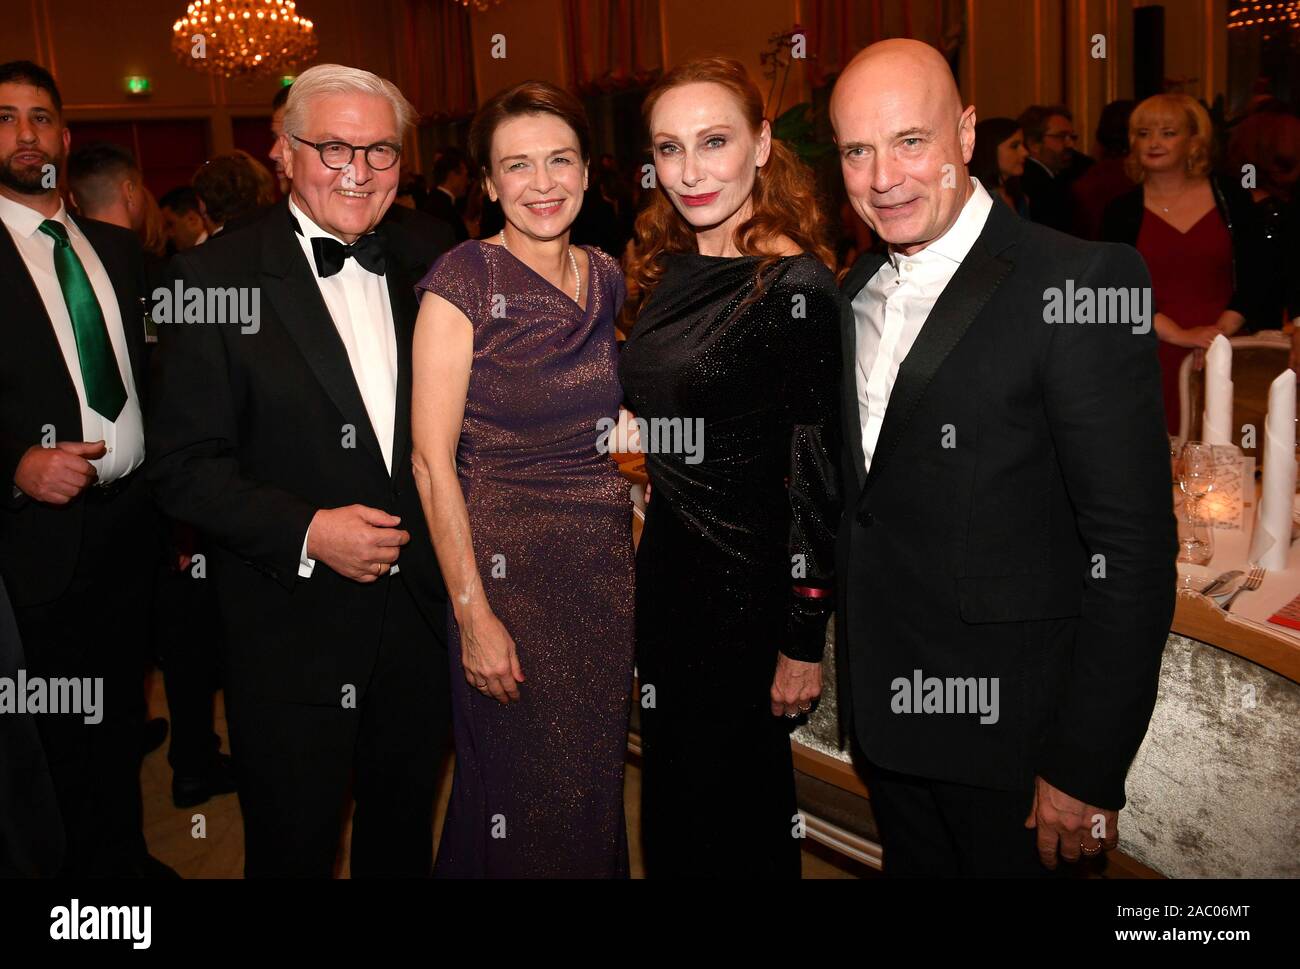 Berlin, Germany. 29th Nov, 2019. Federal President Frank-Walter Steinmeier and his wife Elke Büdenbender are standing next to actress Andrea Sawatzki (2nd from right) and her husband actor Christian Berkel (right) at the 68th Federal Press Ball under the motto 'Change' at the Hotel Adlon. Credit: Jens Kalaene/dpa-Zentralbild/POOL/dpa/Alamy Live News Stock Photo